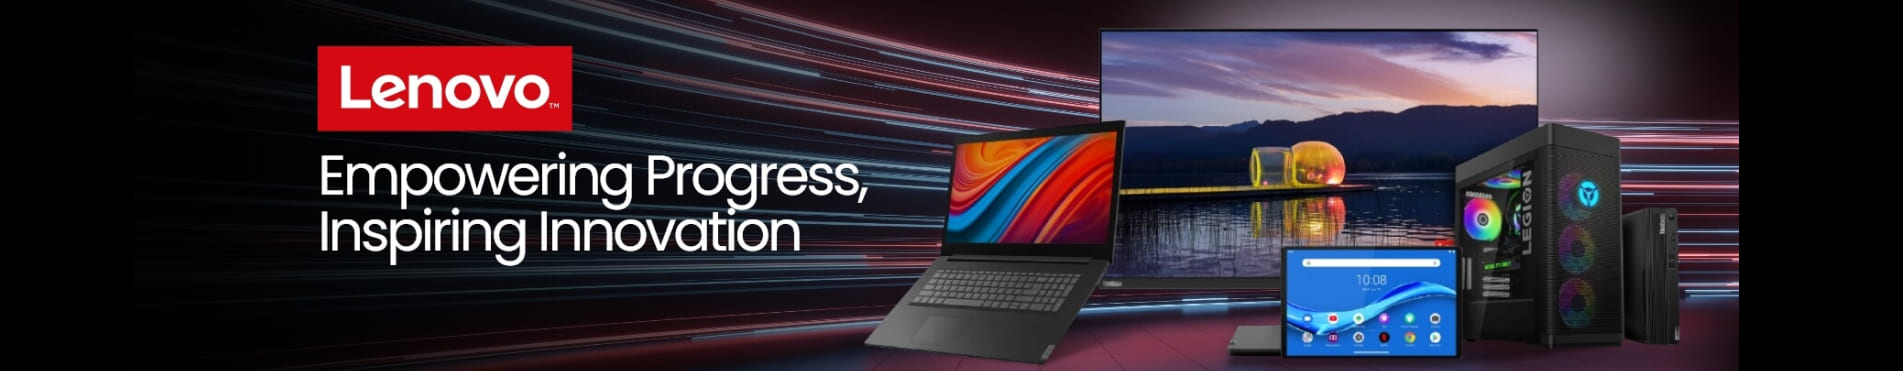 Best Prices on Lenovo products in Oman on tecneek.com !